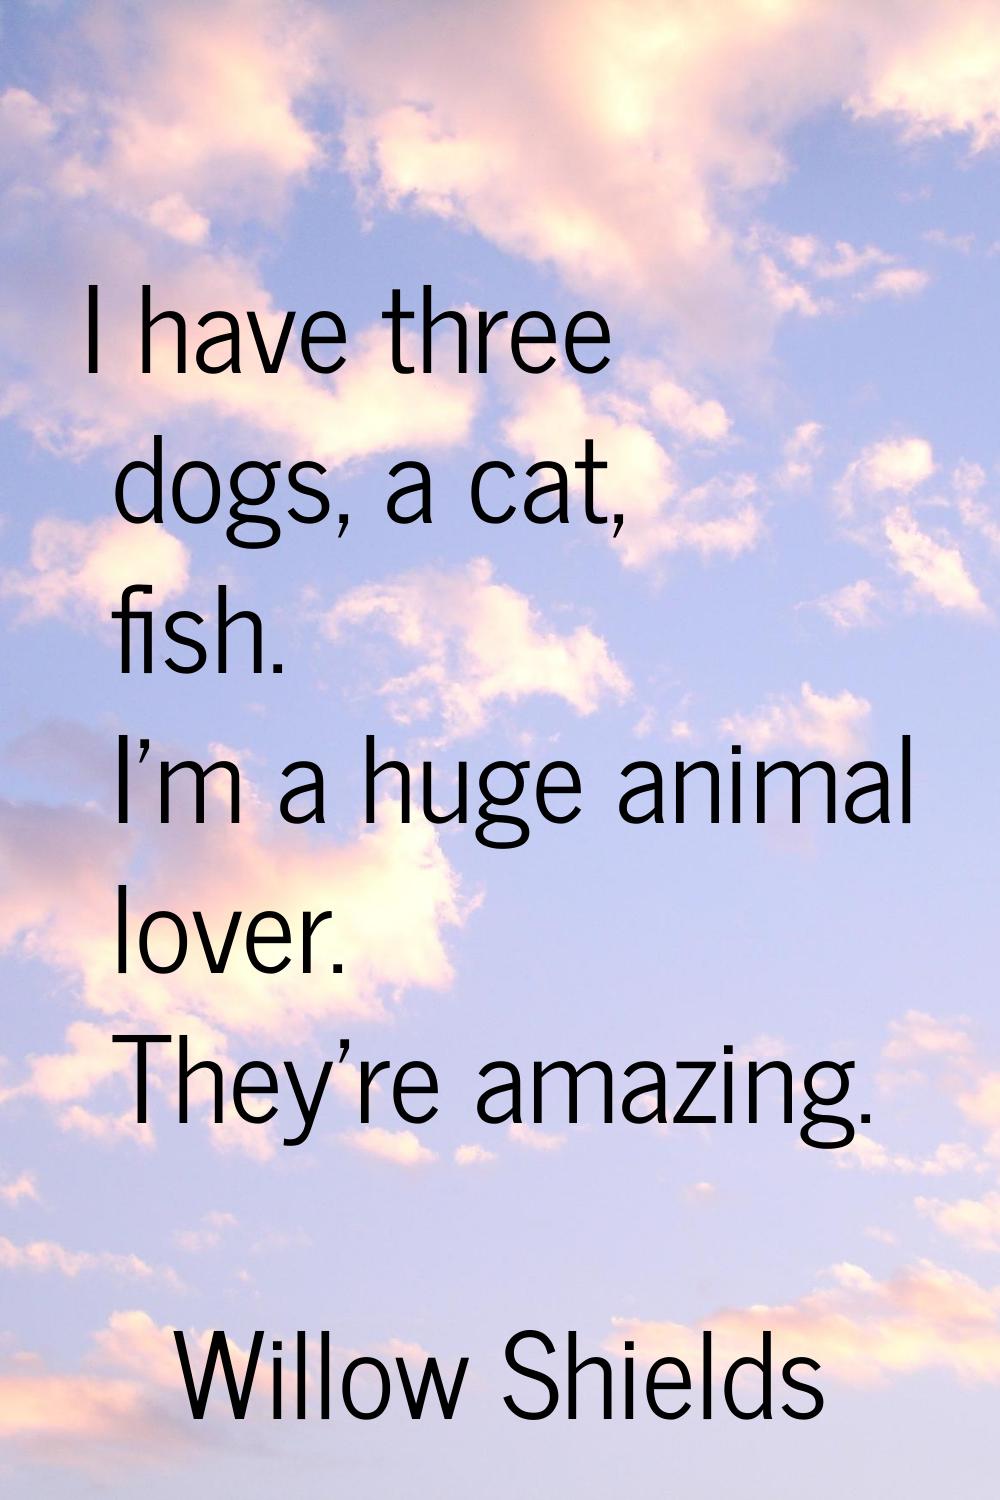 I have three dogs, a cat, fish. I'm a huge animal lover. They're amazing.